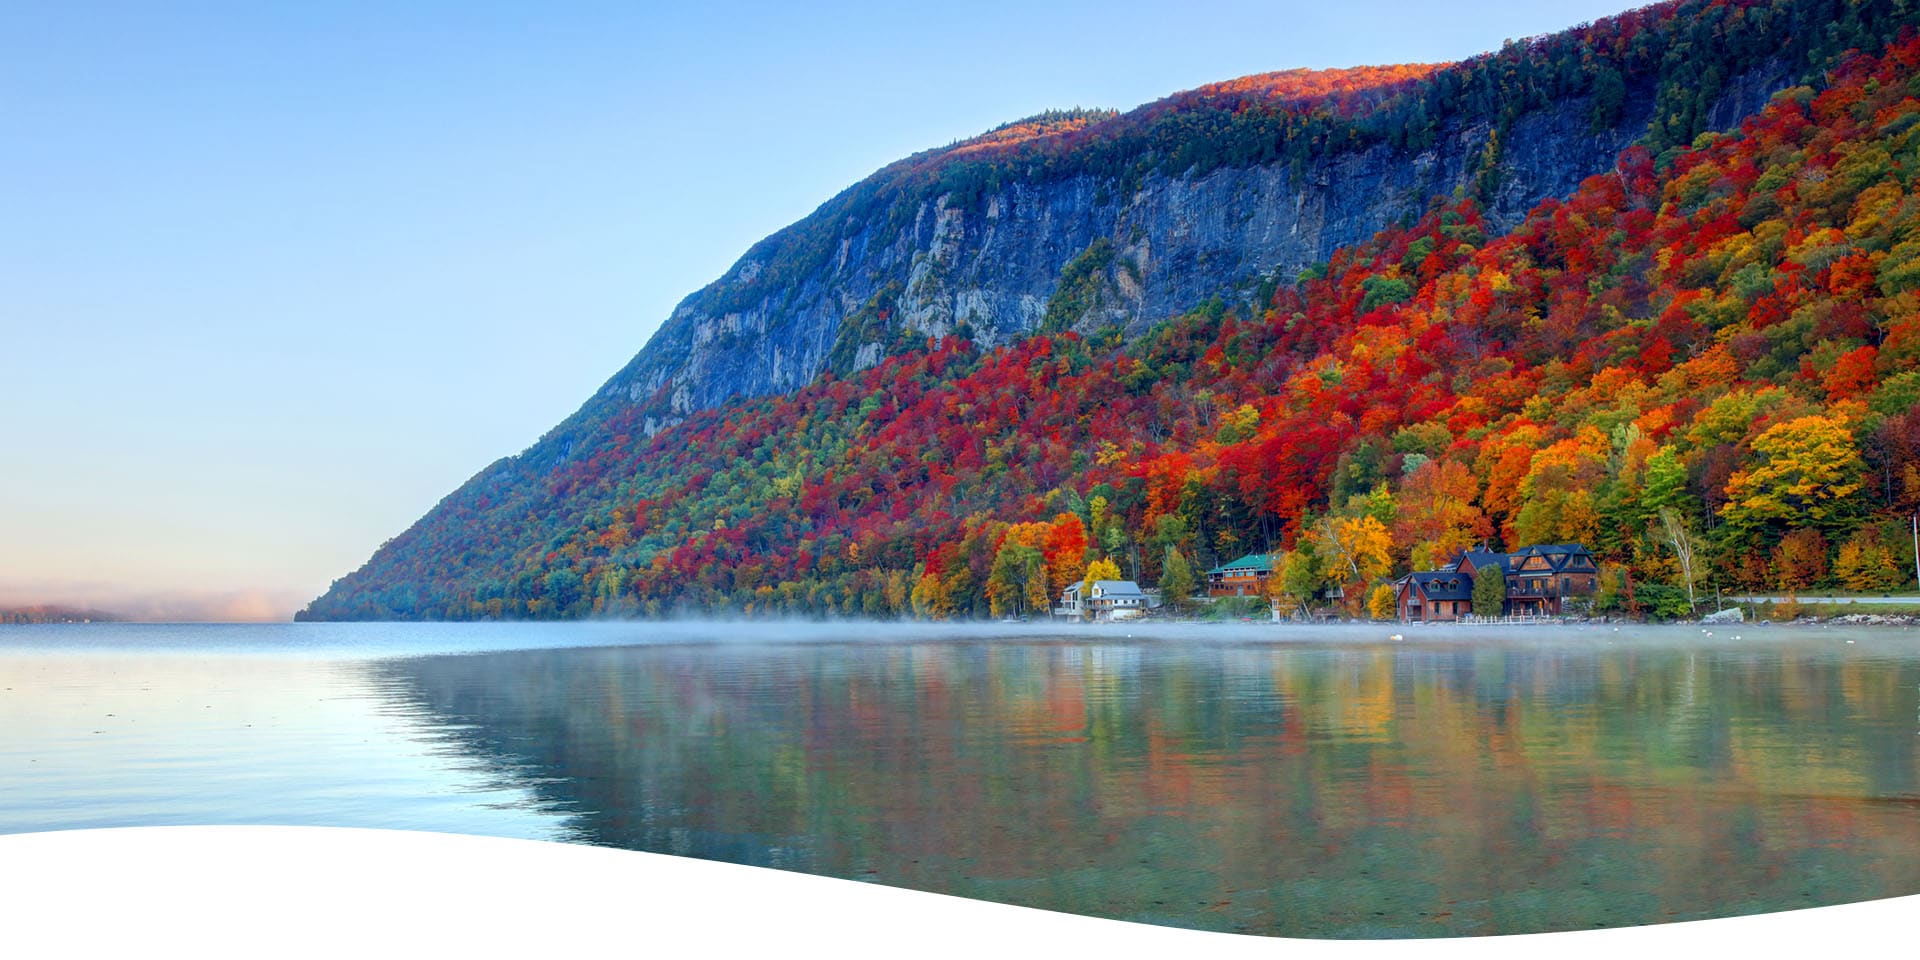 The Best Lakes in the U.S.